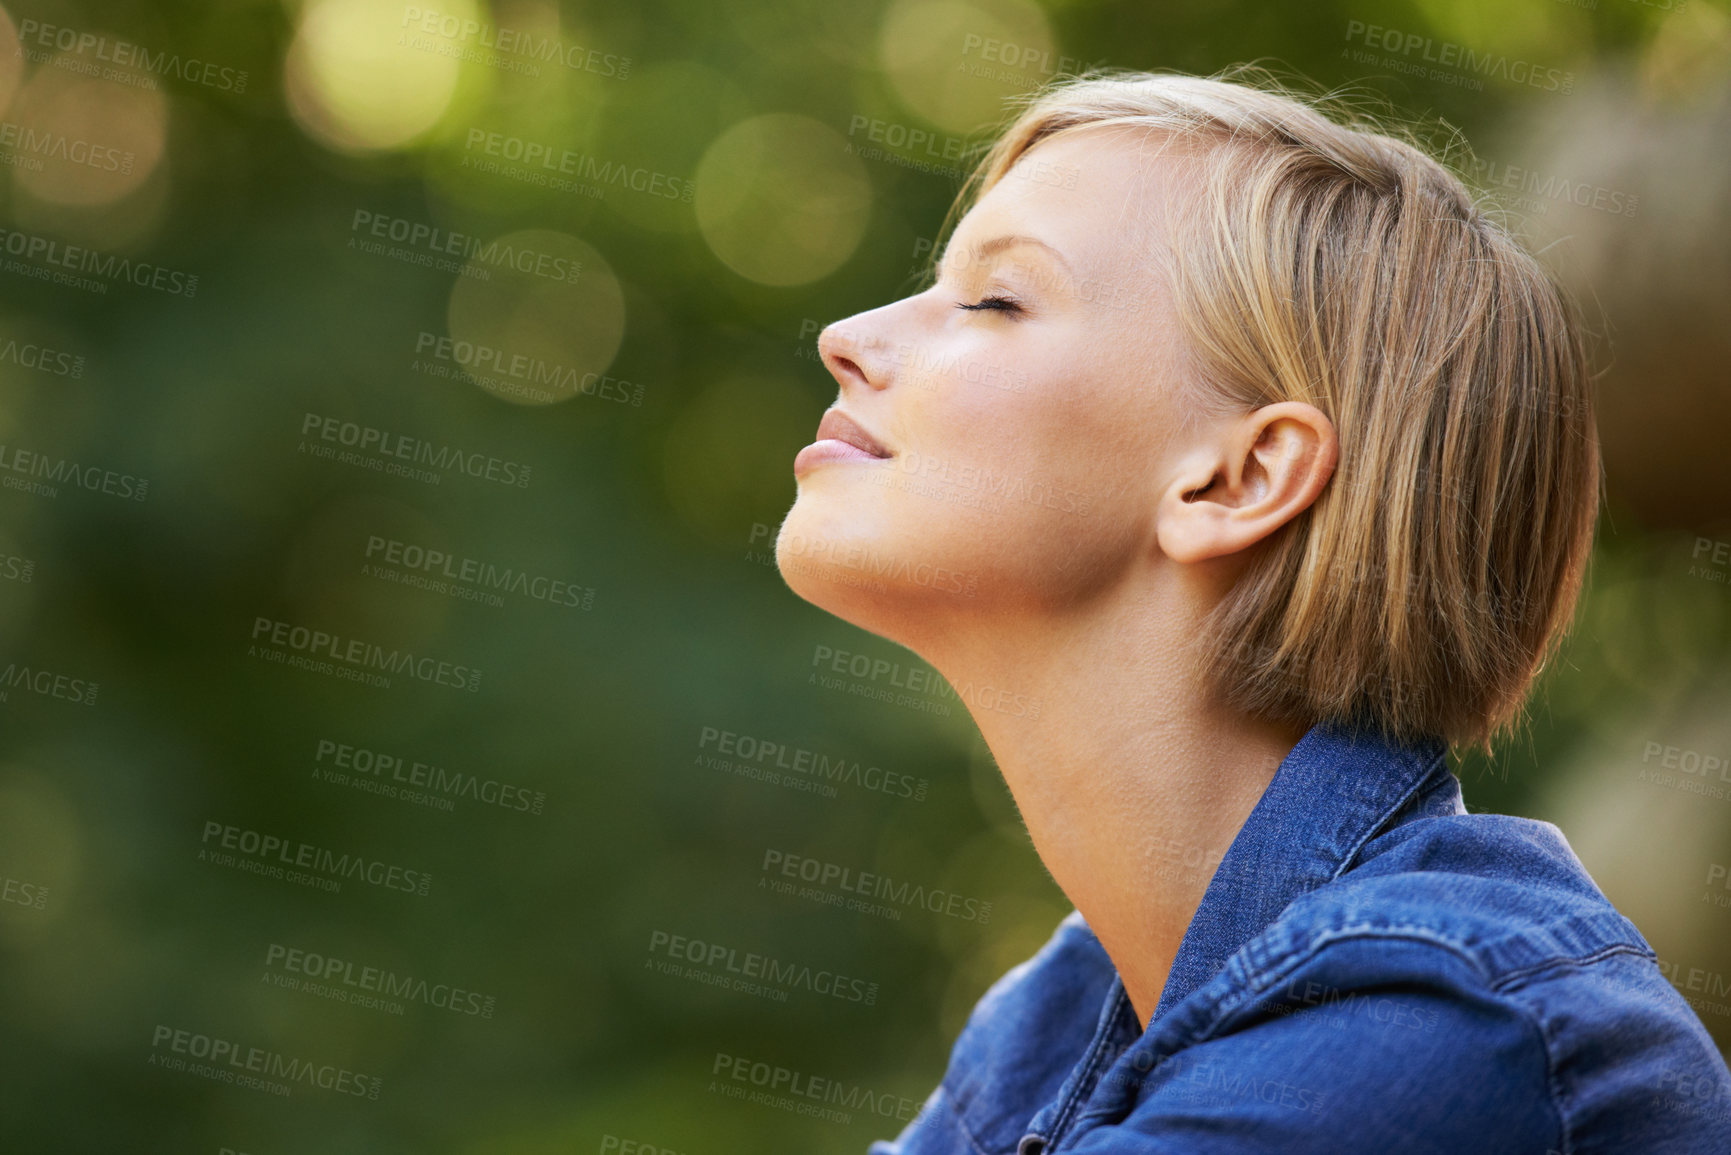 Buy stock photo A young woman outdoors with her eyes closed beside copyspace